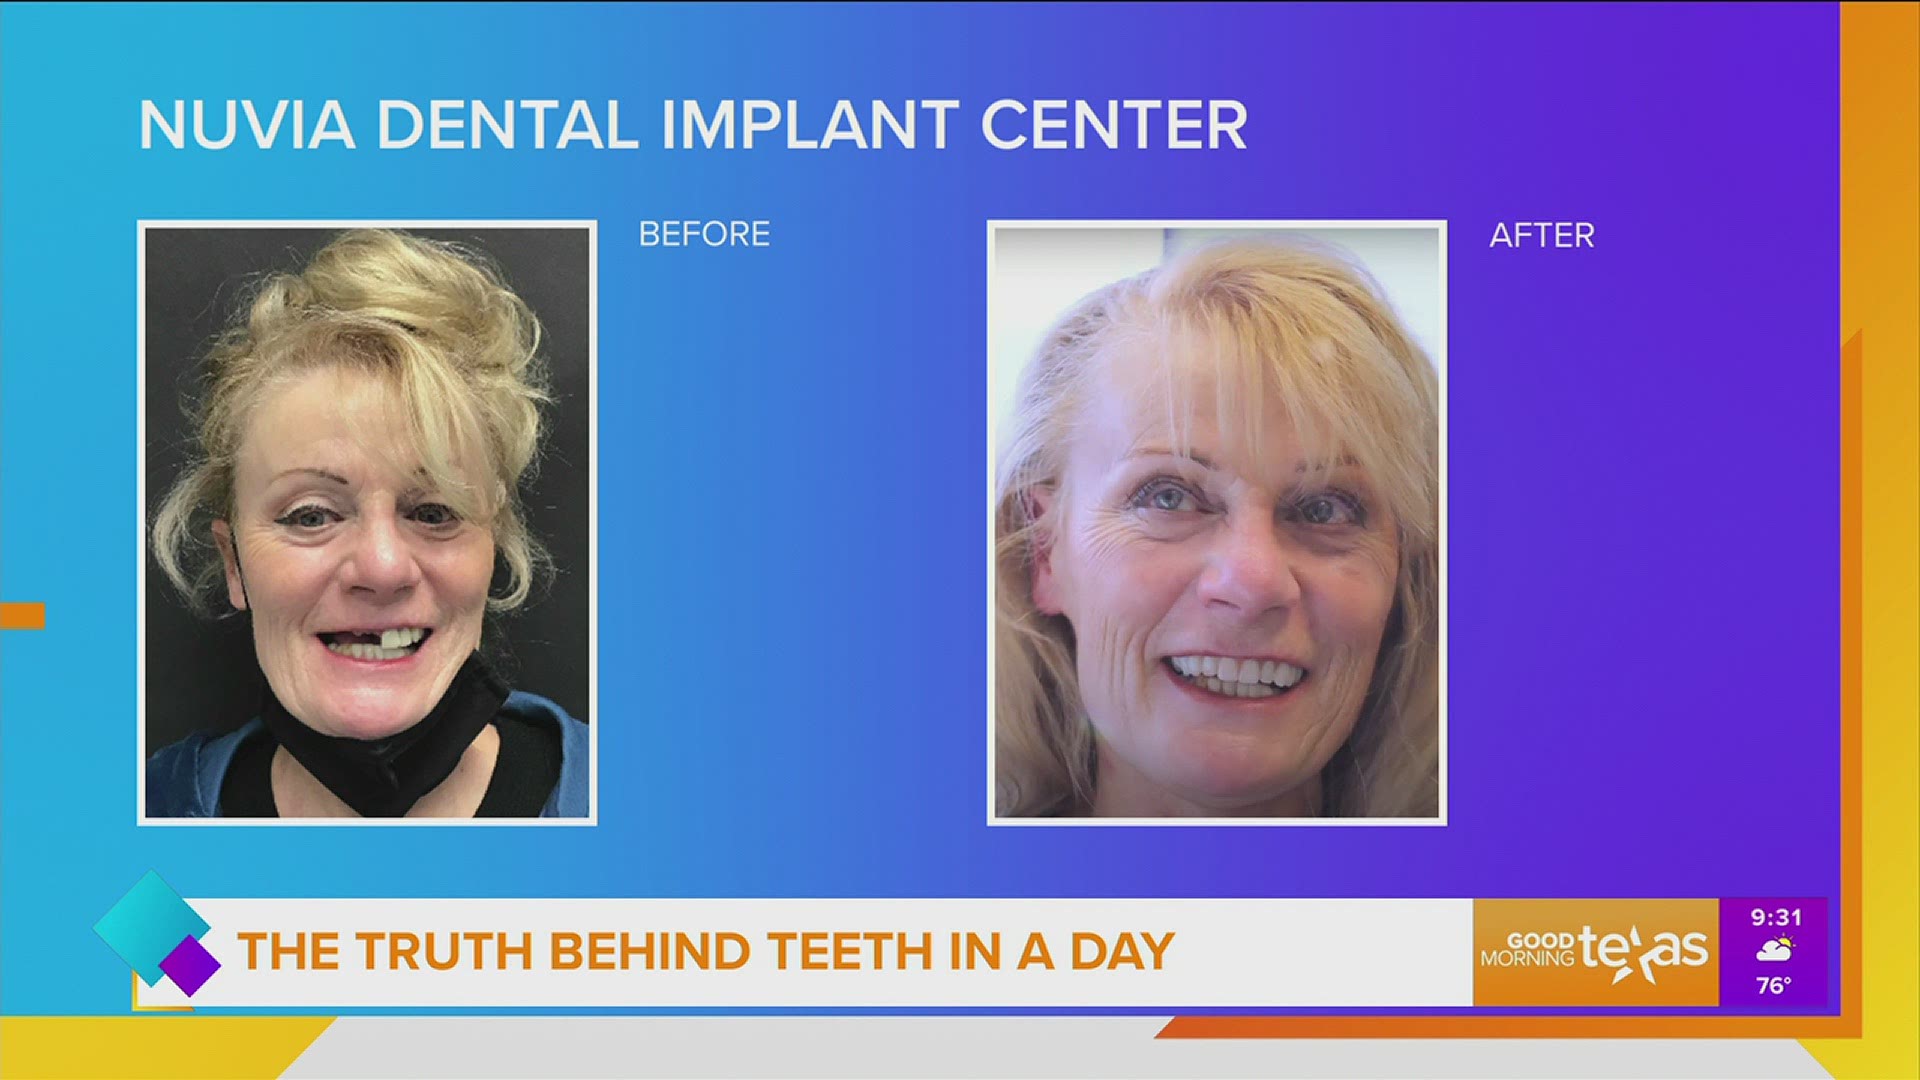 This segment is sponsored by: Nuvia Dental Implant Center